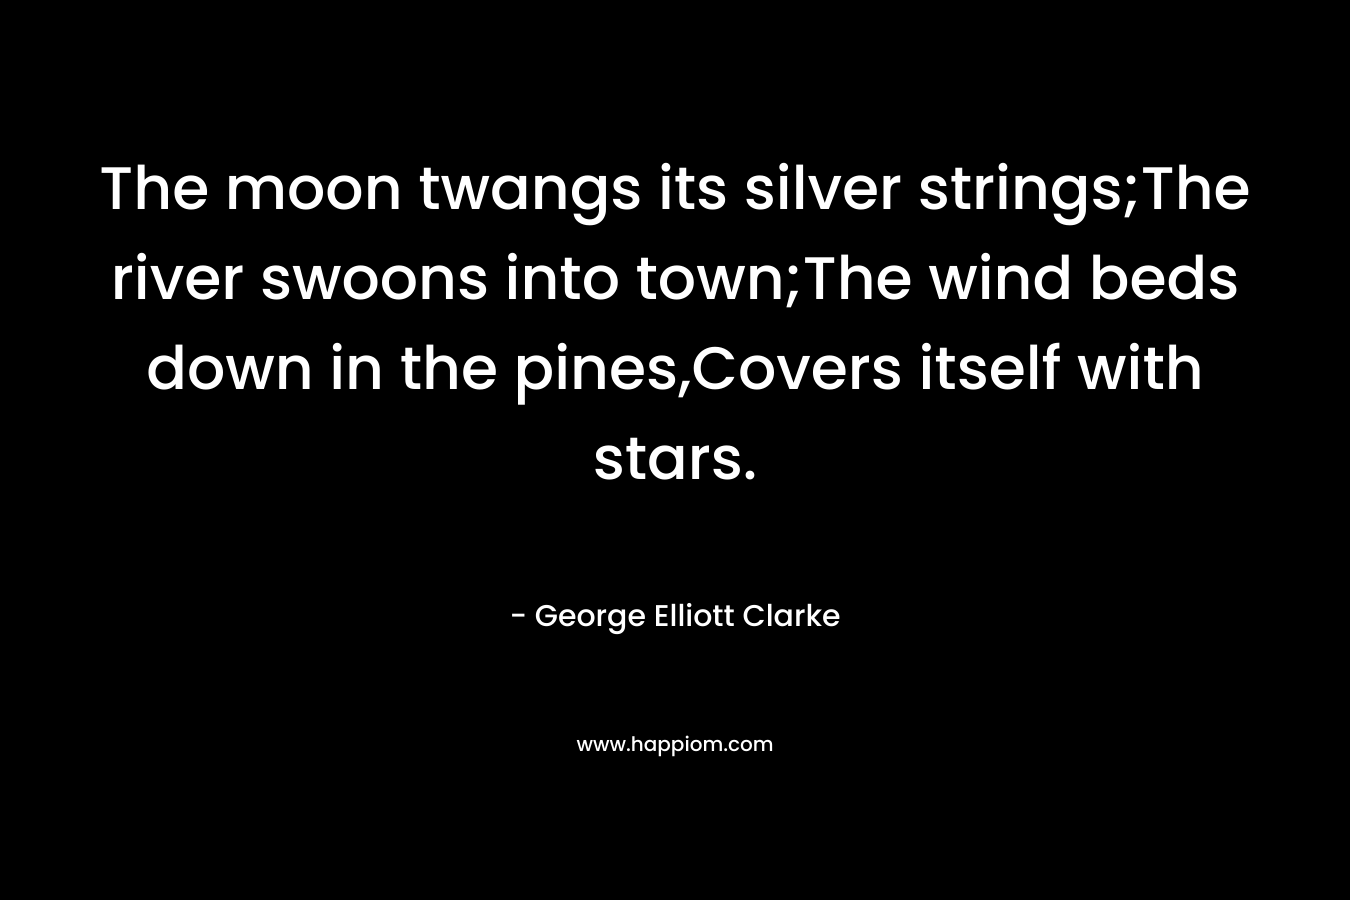 The moon twangs its silver strings;The river swoons into town;The wind beds down in the pines,Covers itself with stars. – George Elliott Clarke